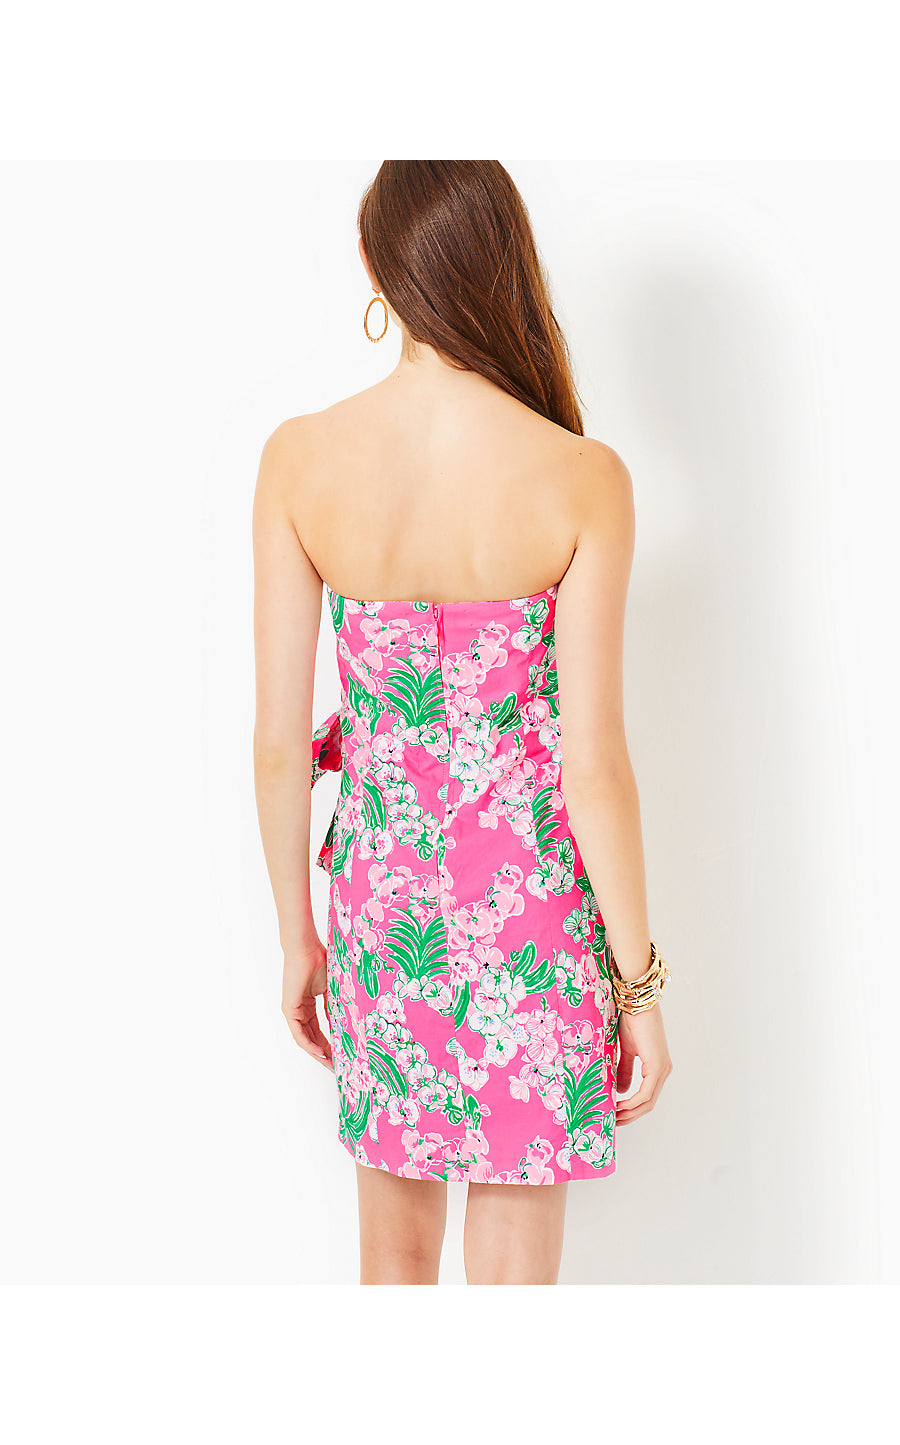 STELA STRAPLESS BOW DRESS  - WORTH A LOOK